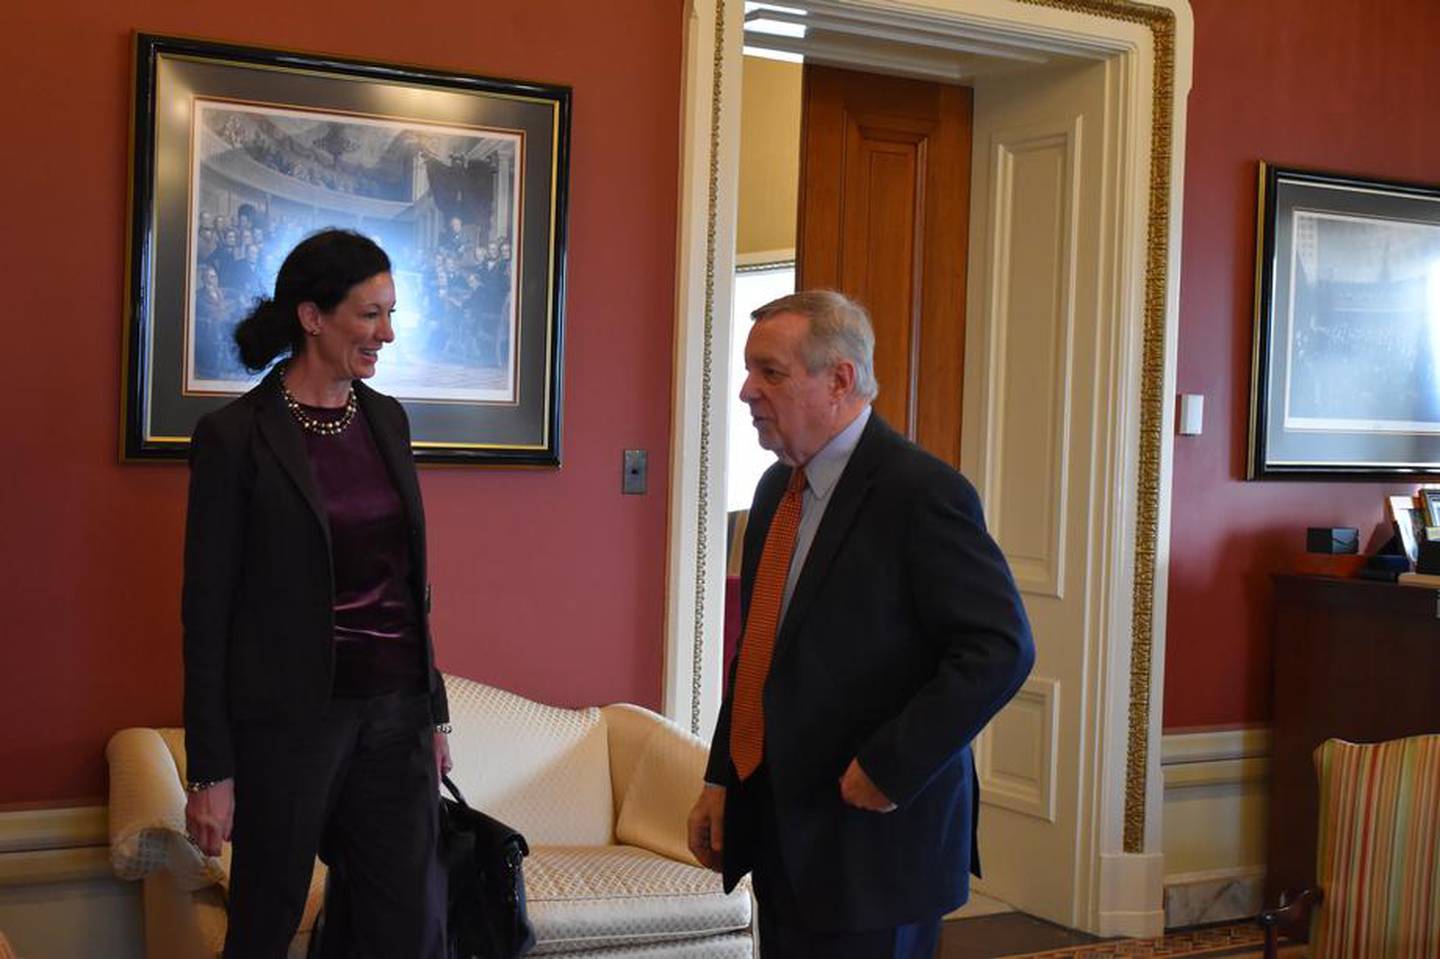 Colette Peters, director of the Bureau of Prisons, meets with U.S. Sen. Dick Durbin of Illinois, chairman of the Senate Judiciary Committee, in a meeting in Washington, D.C., on Dec. 14.